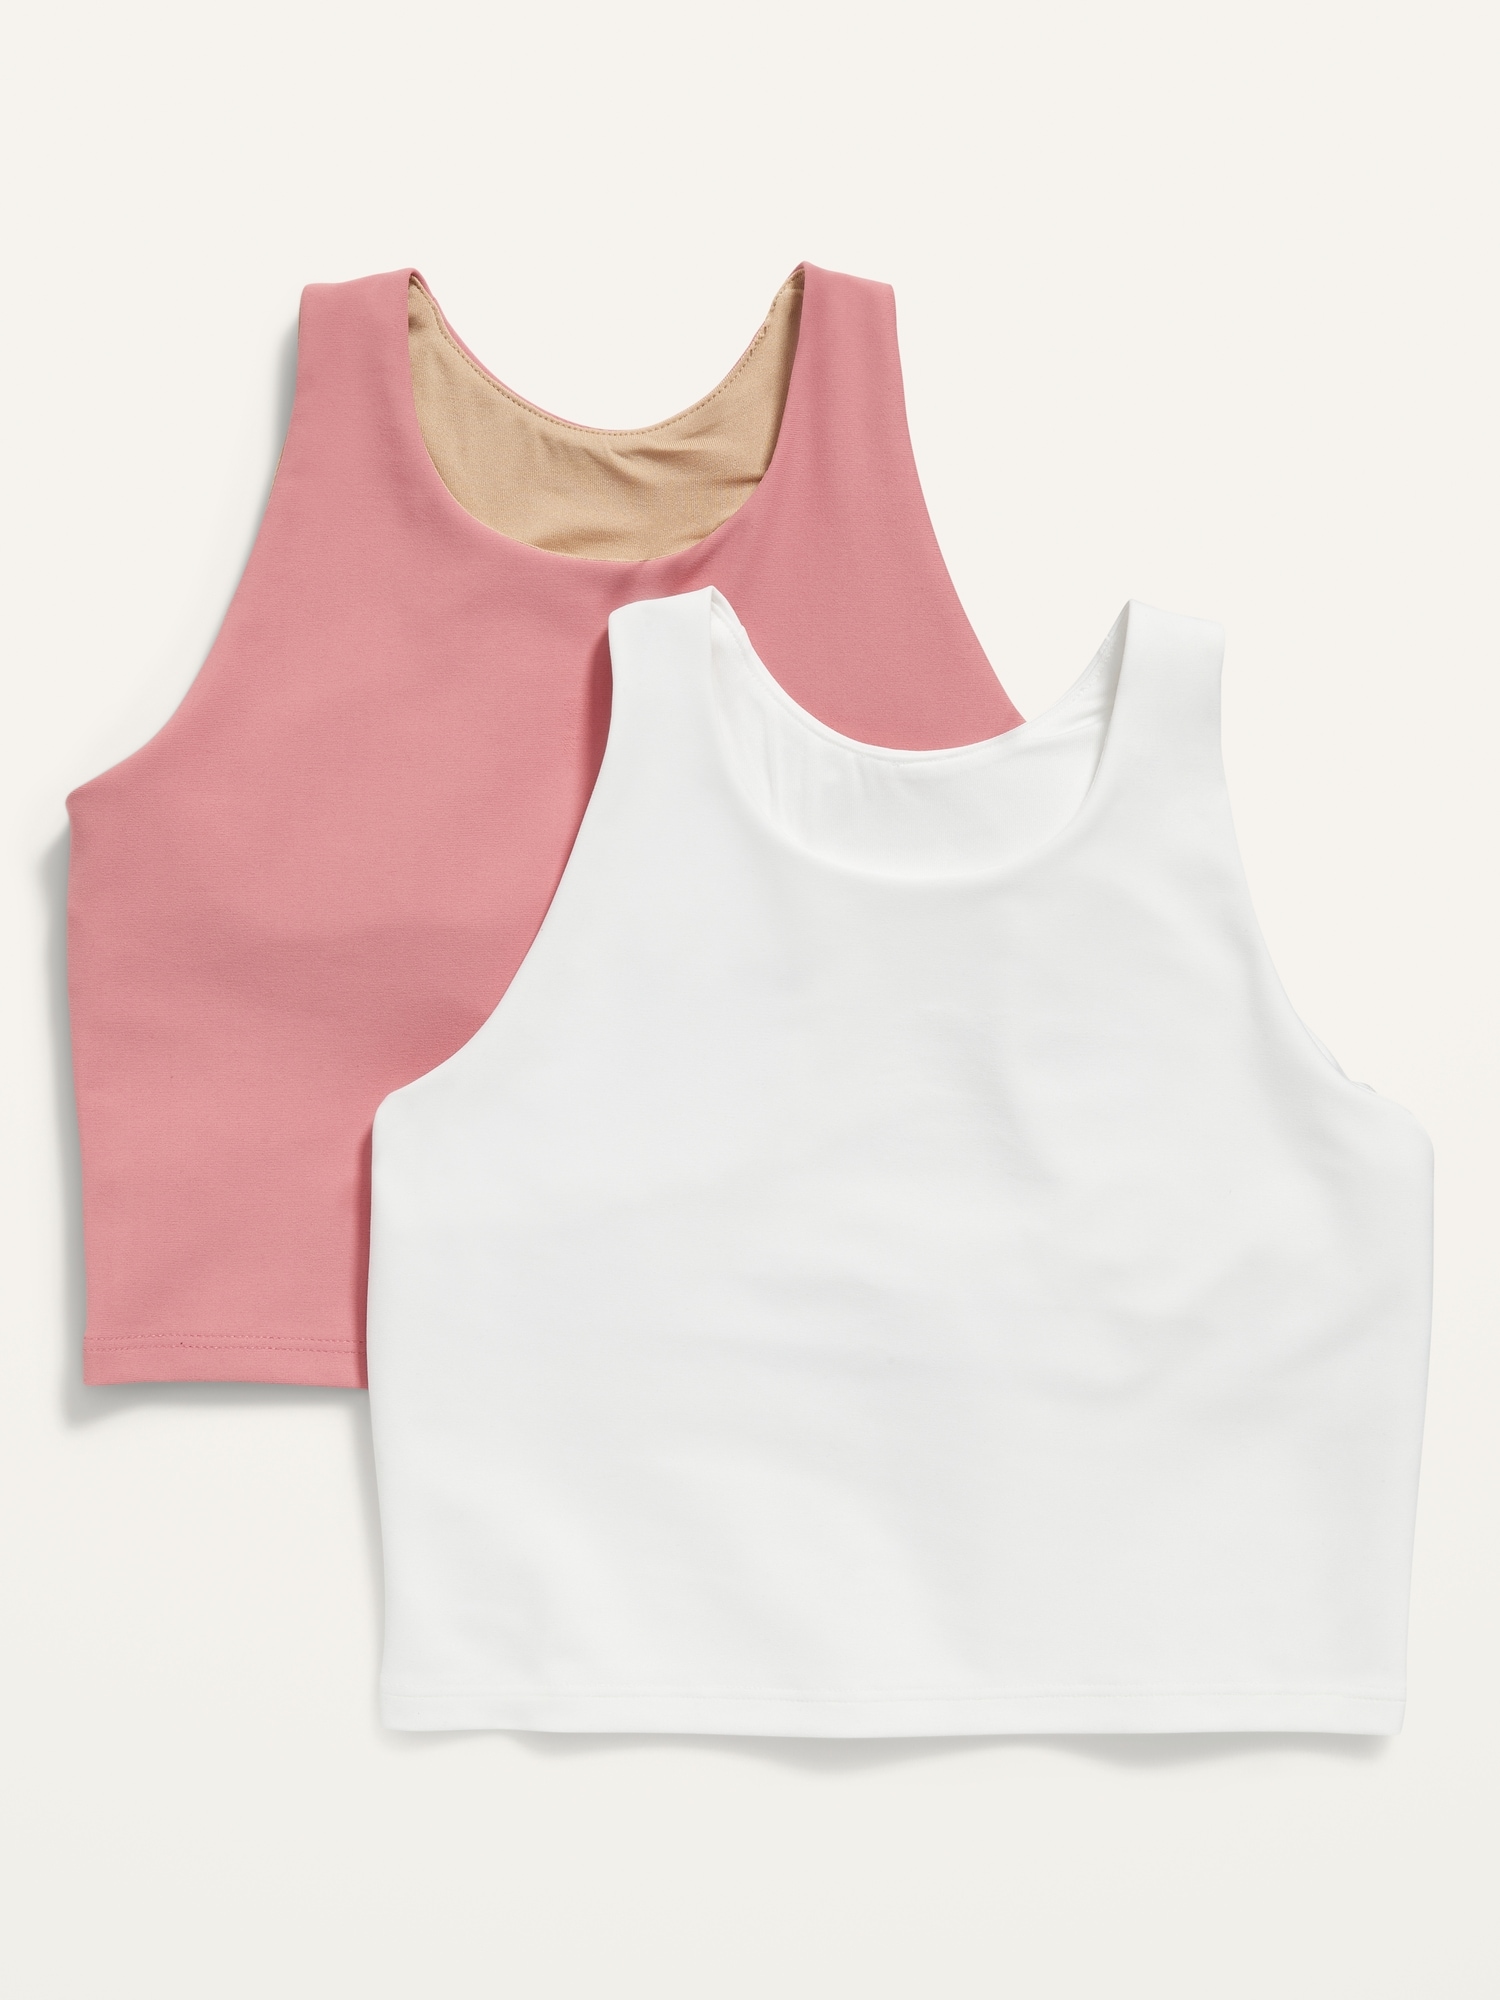 Old Navy PowerSoft Longline Sports Bra 2-Pack for Girls pink. 1